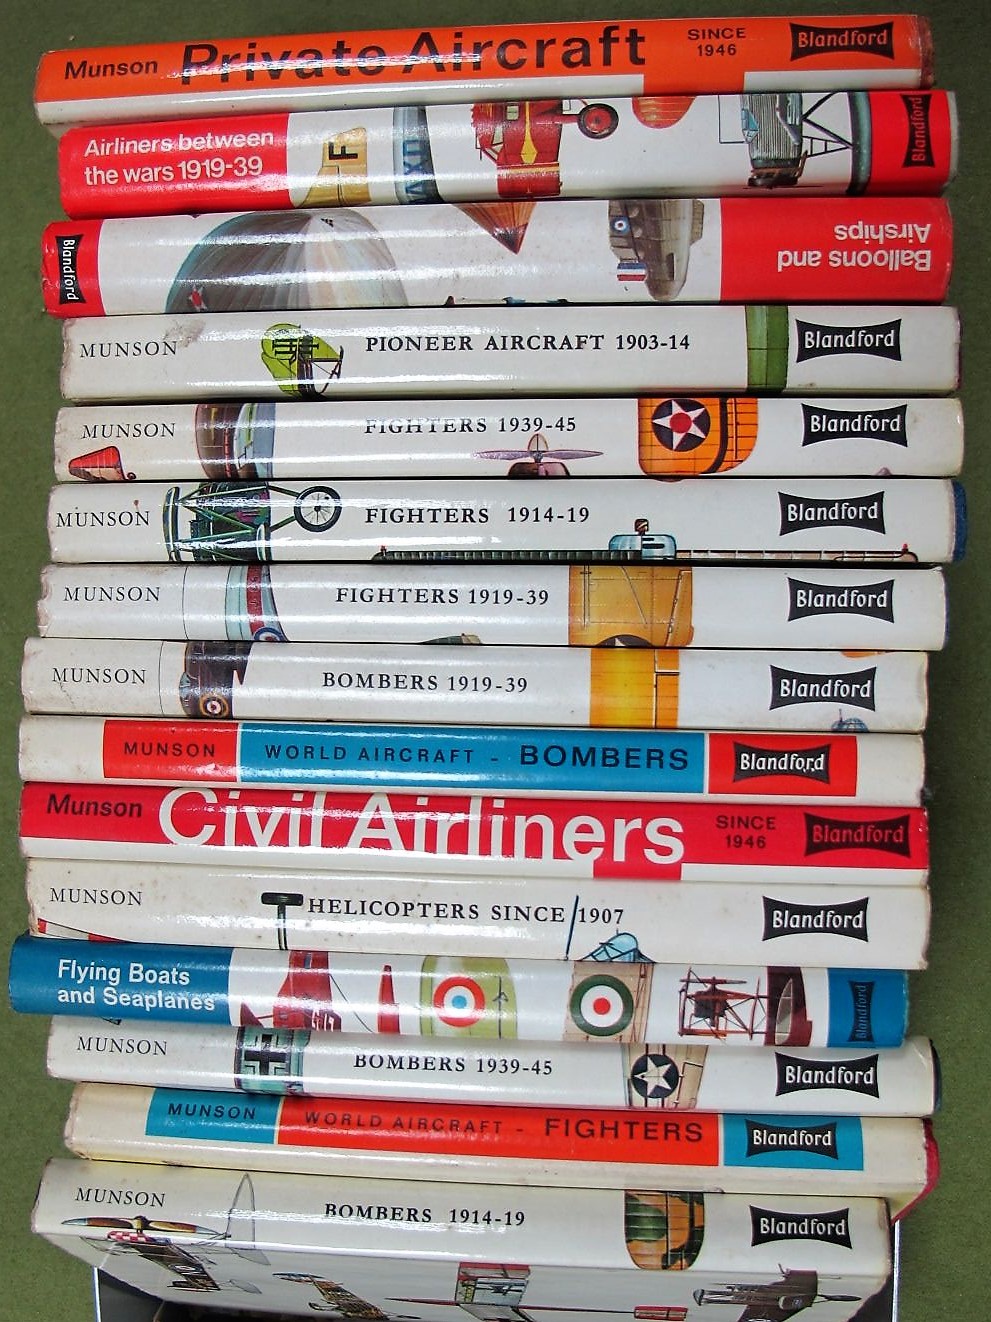 Fifteen Hardbook Books From The Blandford Aviation Series, including The Pocket Encyclopedia of